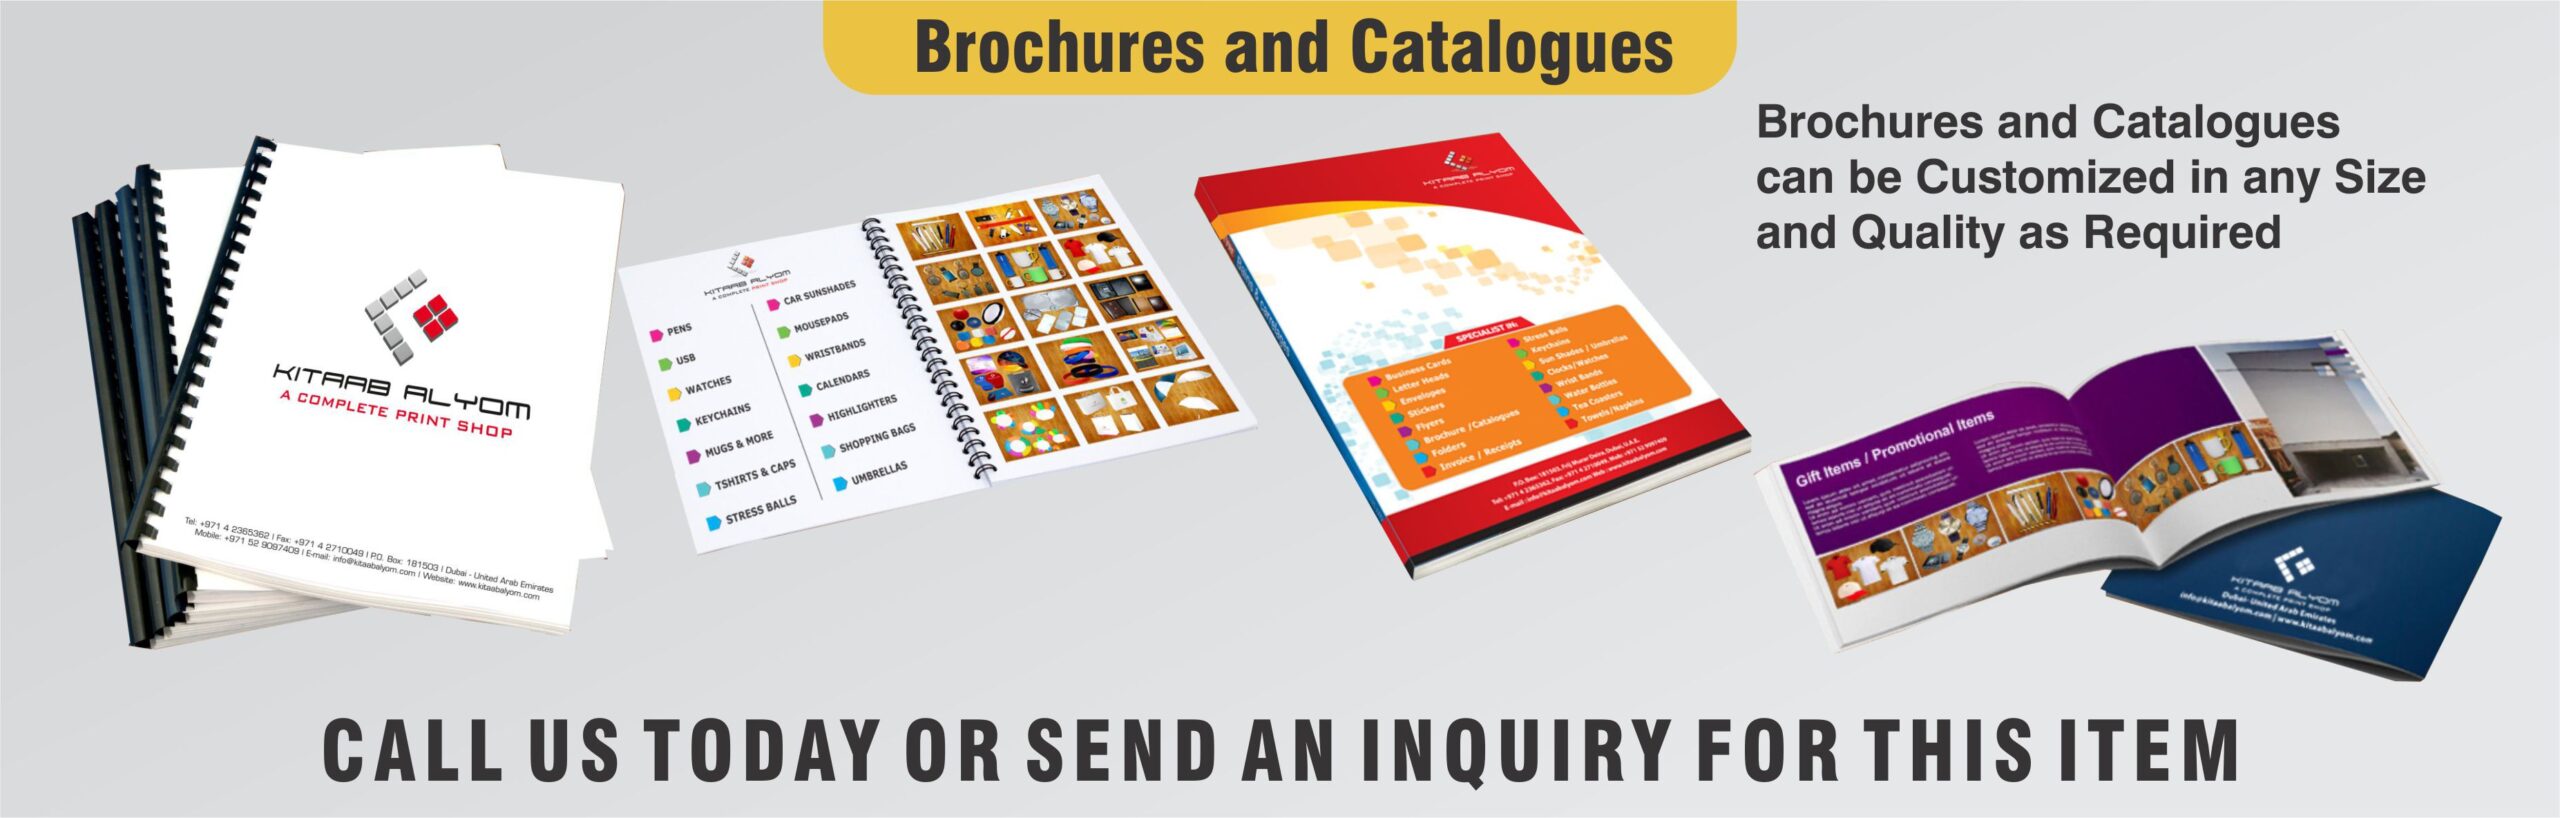 Brochures and Catalogues